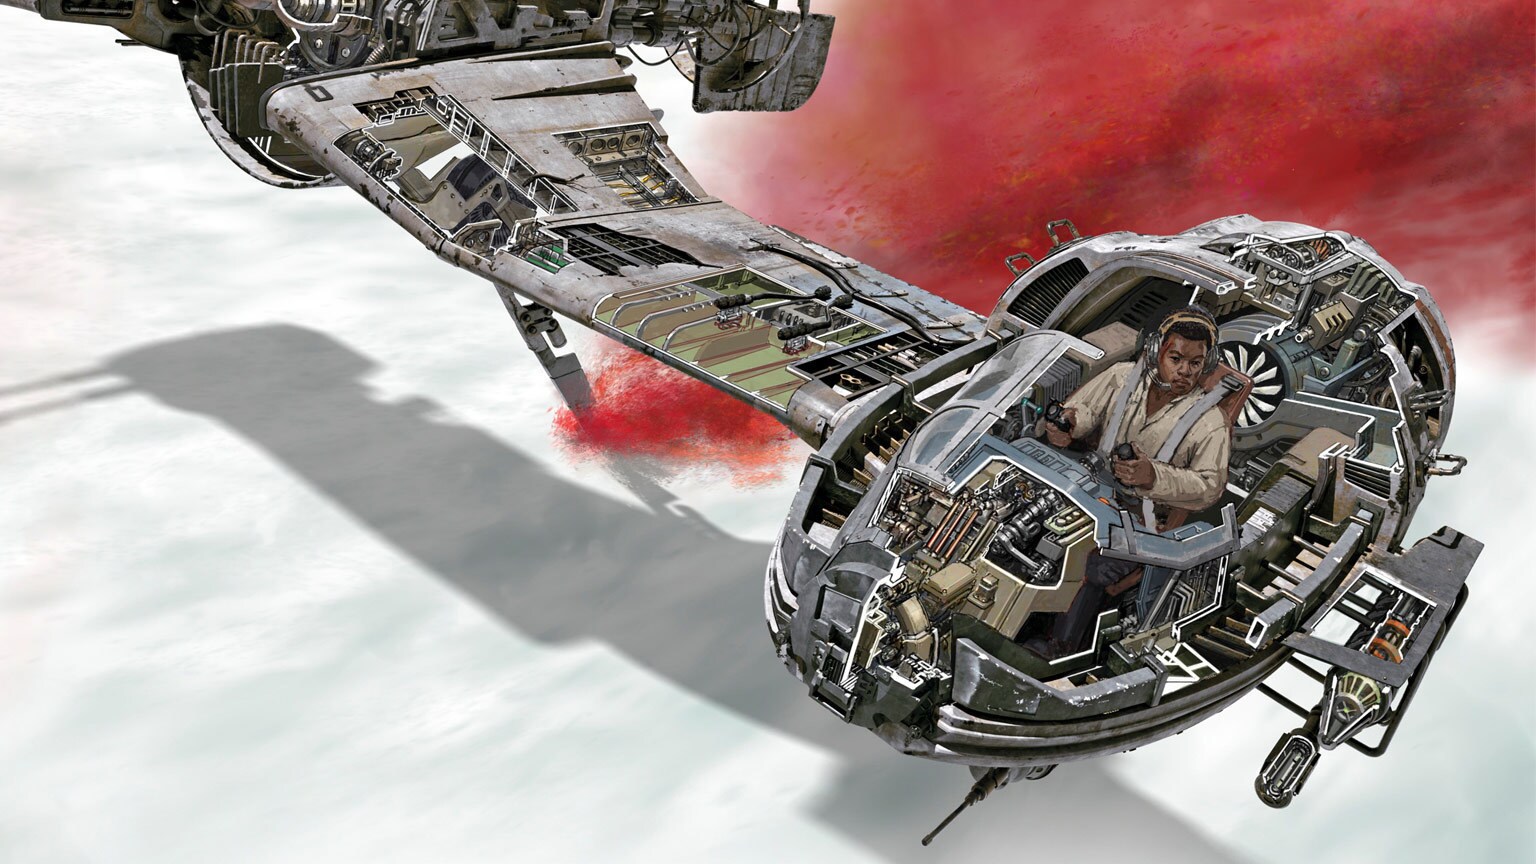 Step Inside the Galaxy's Newest Ships and Vehicles with Star Wars: The Last Jedi - Incredible Cross-Sections - Exclusive Interview